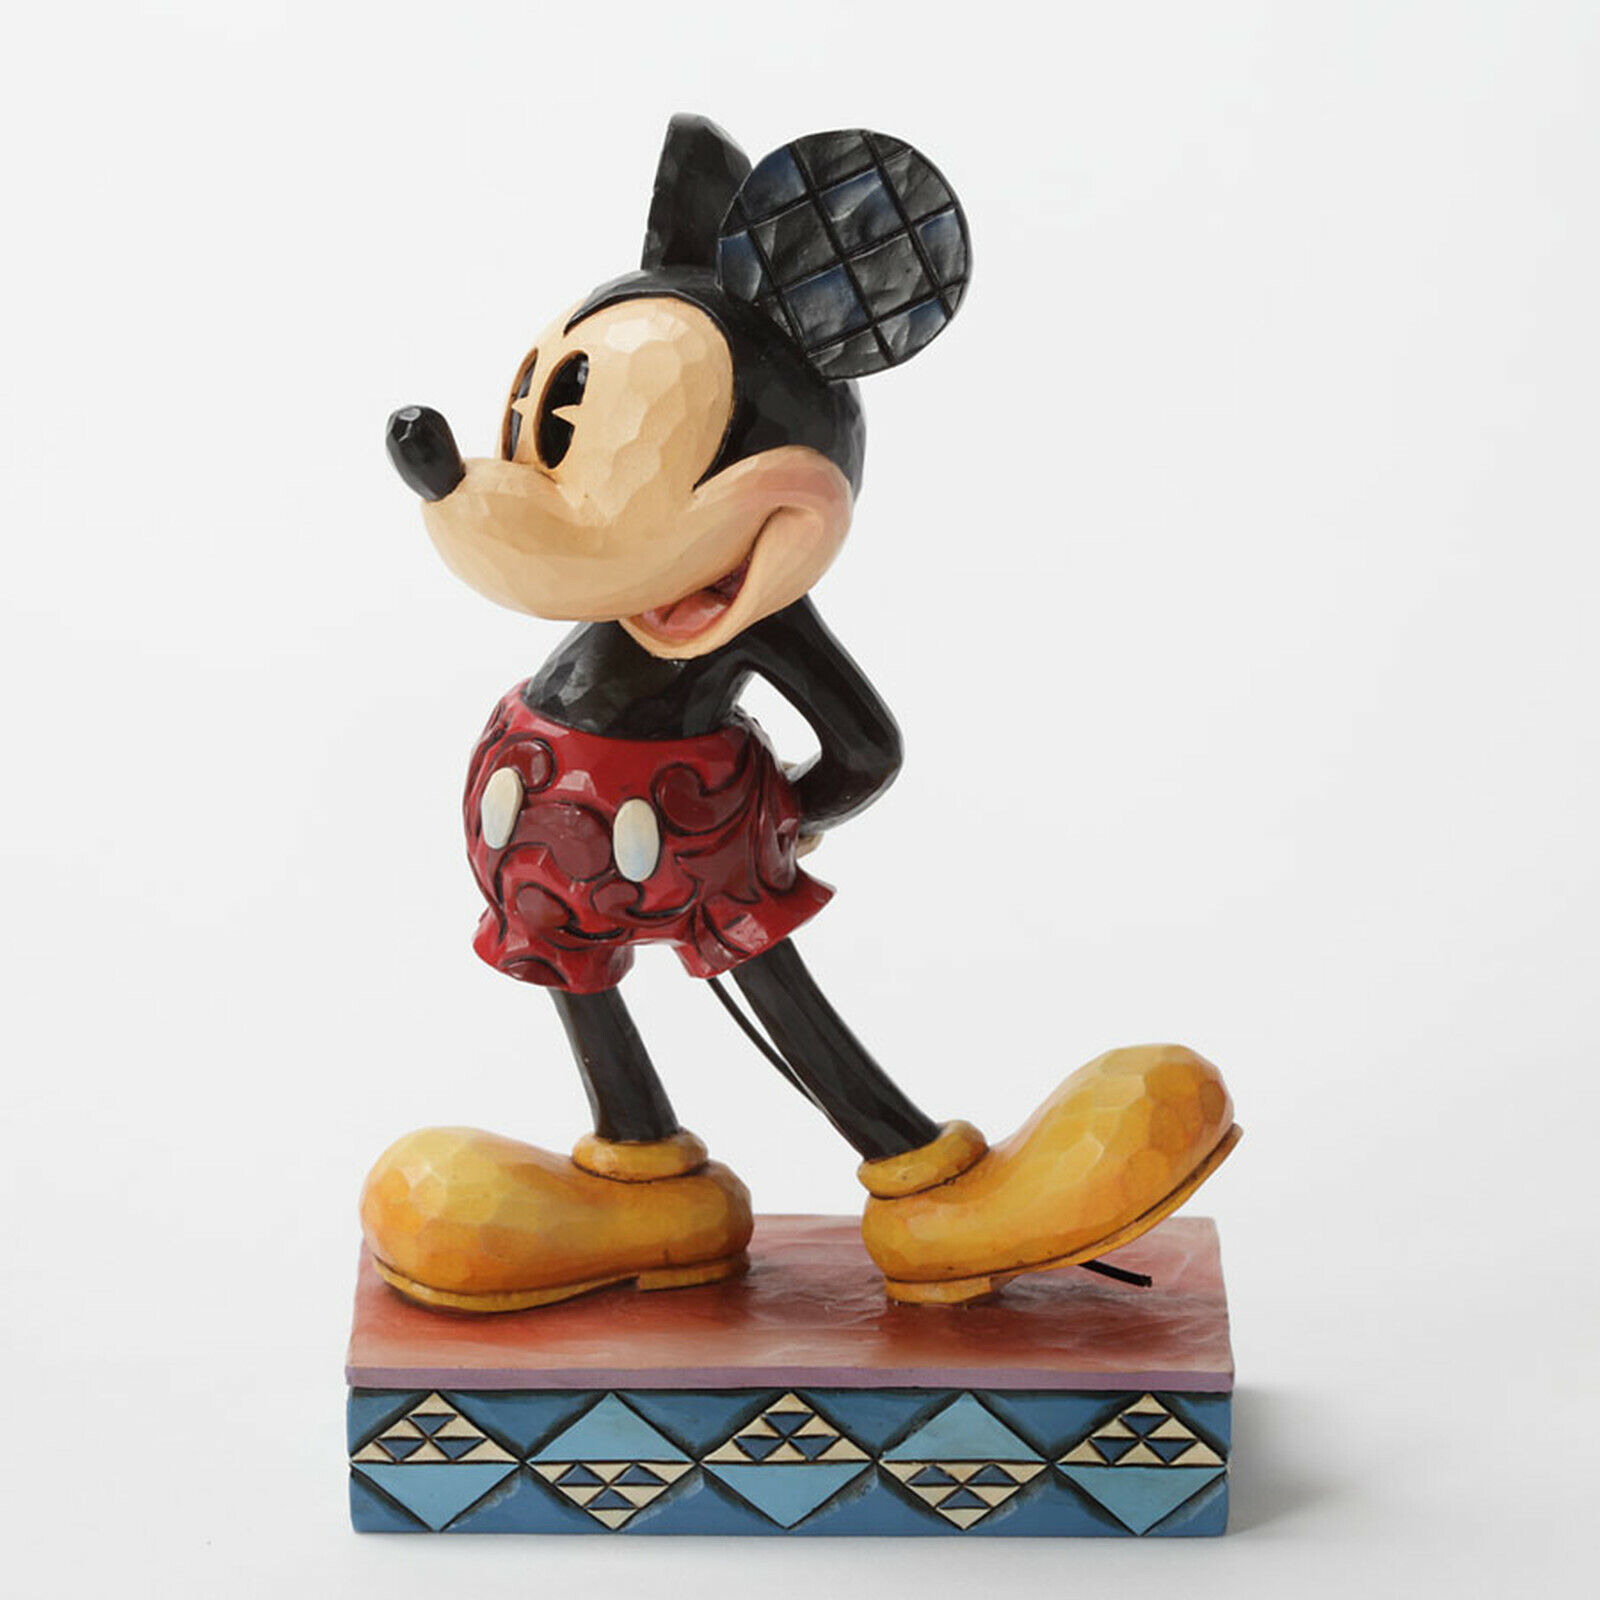 Primary image for Jim Shore Mickey Mouse Figurine The Original 4.9 inches High Disney Traditions